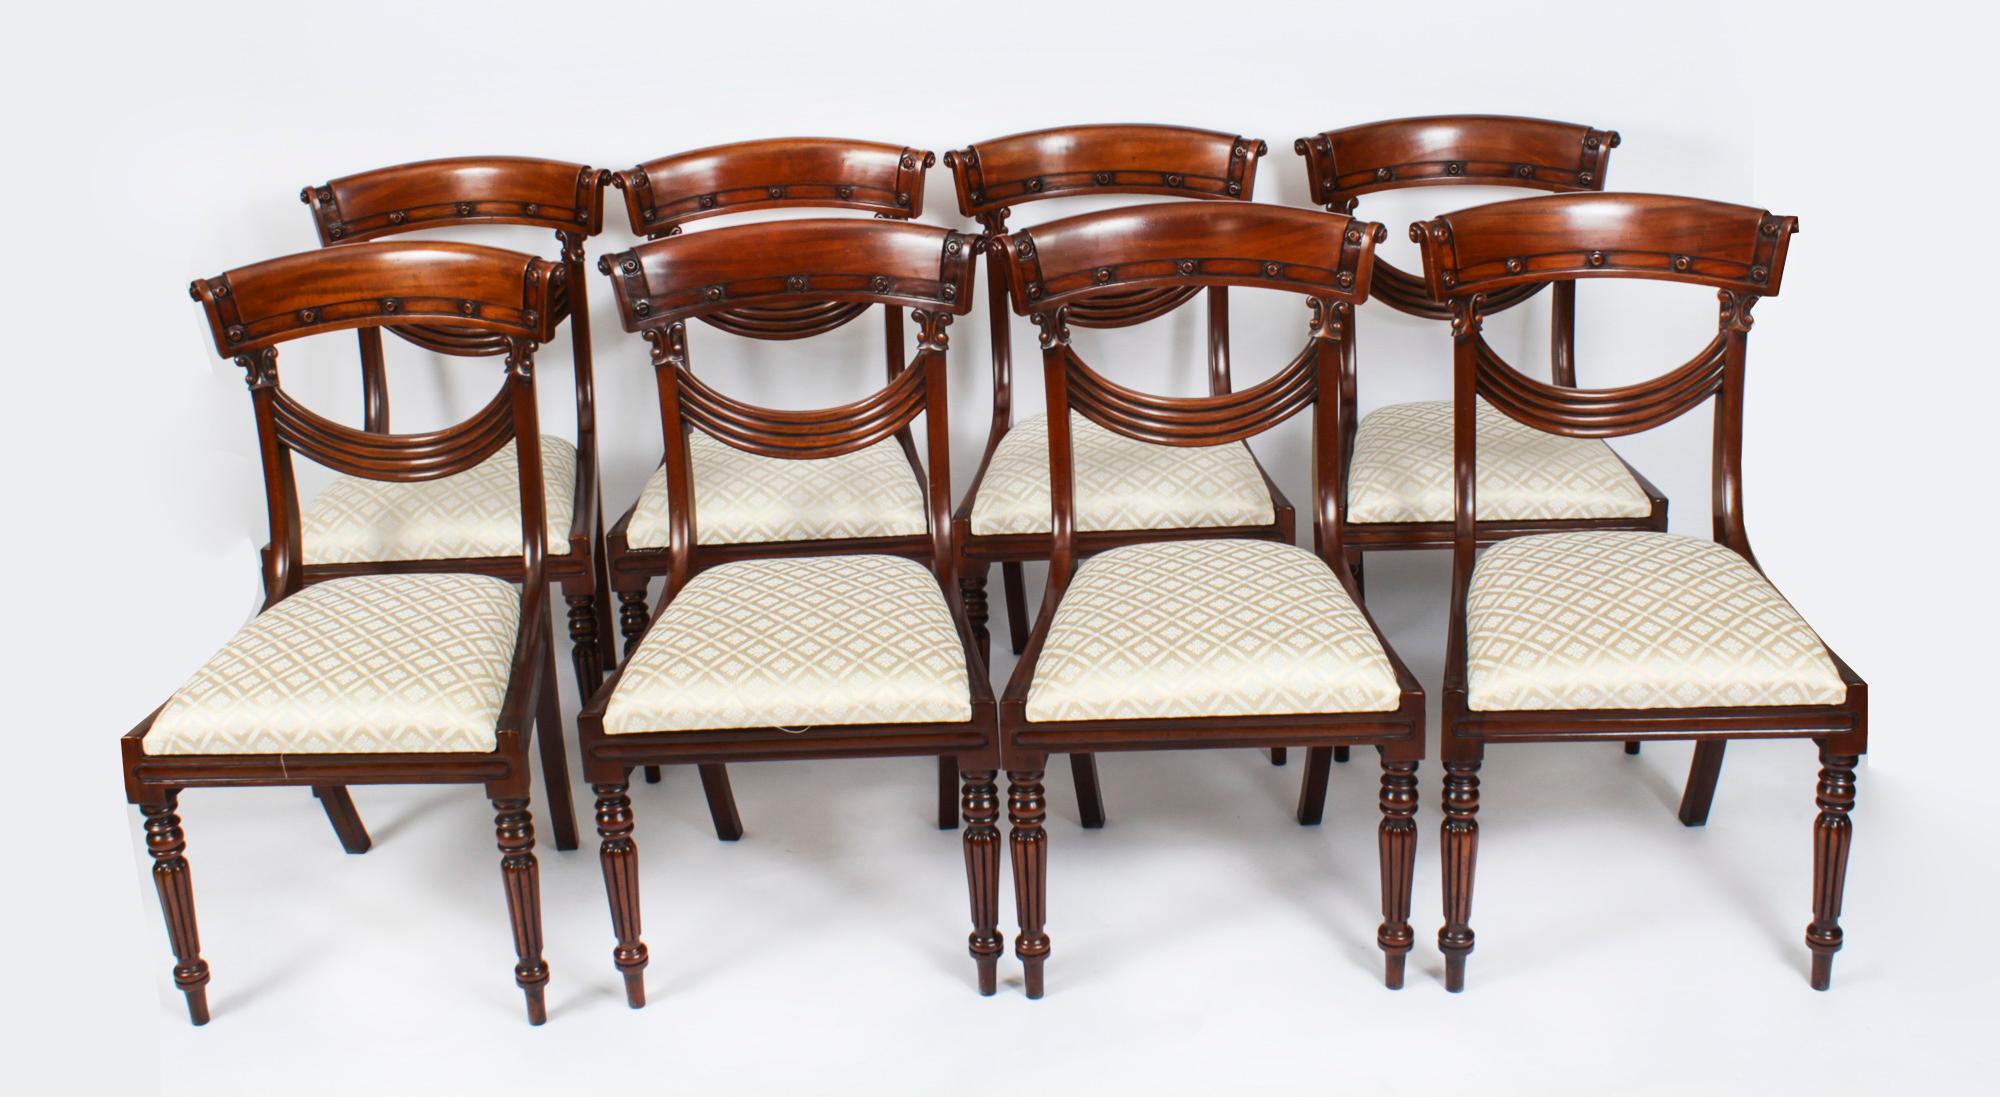 Vintage Regency Revival Dining Table & 8 Chairs Mid 20th Century 7